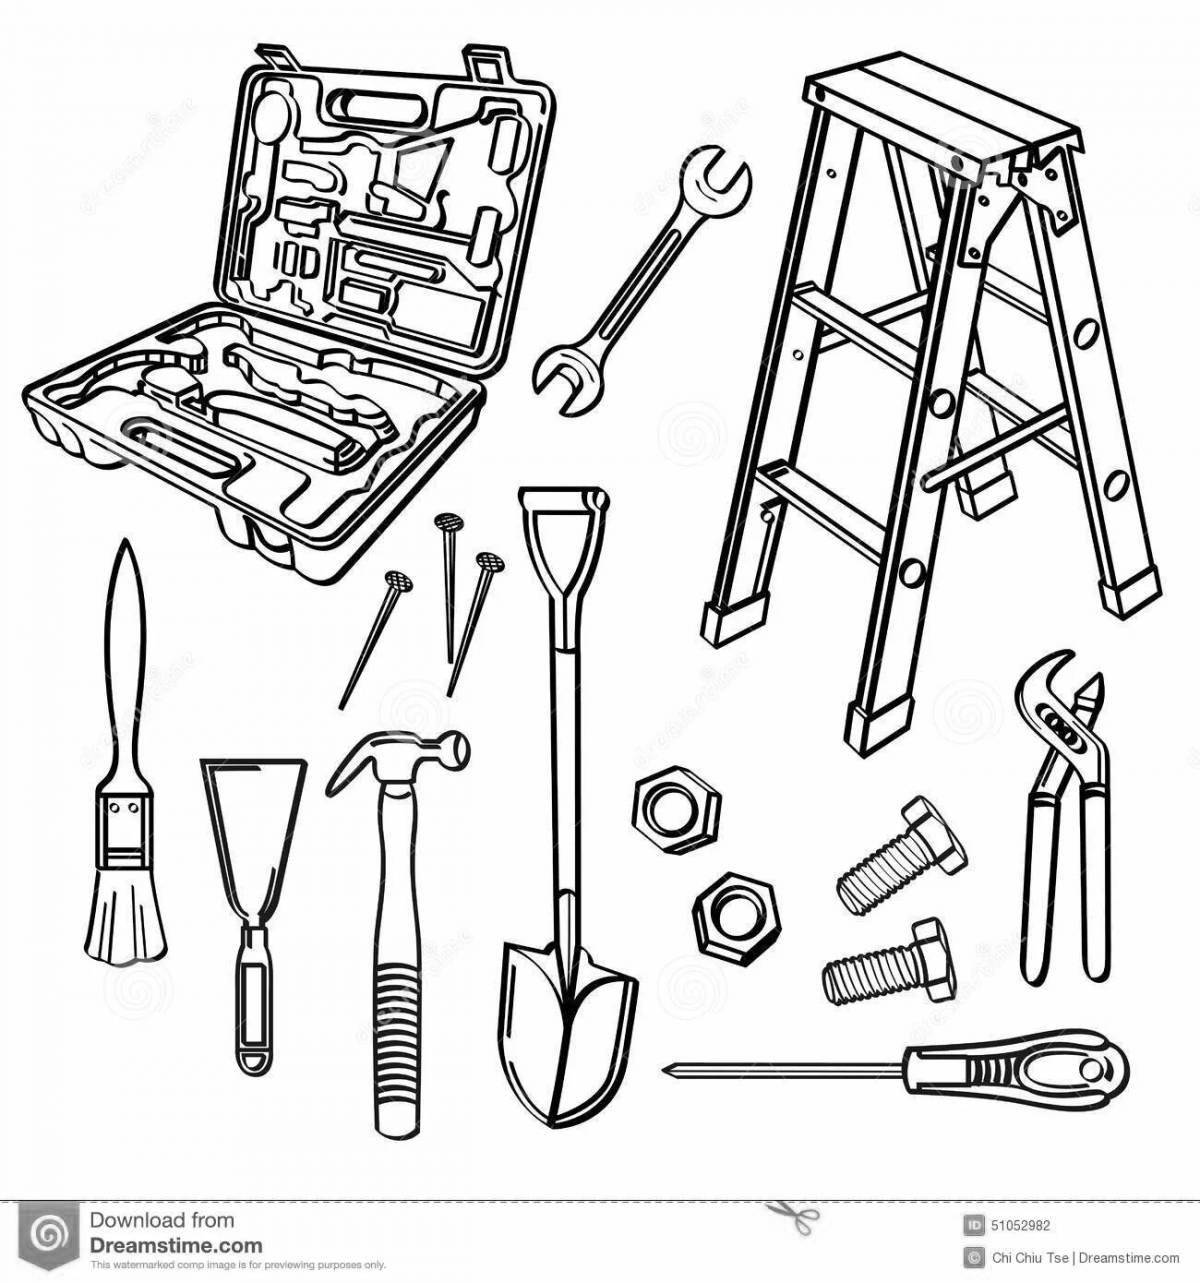 Tools for kids #1